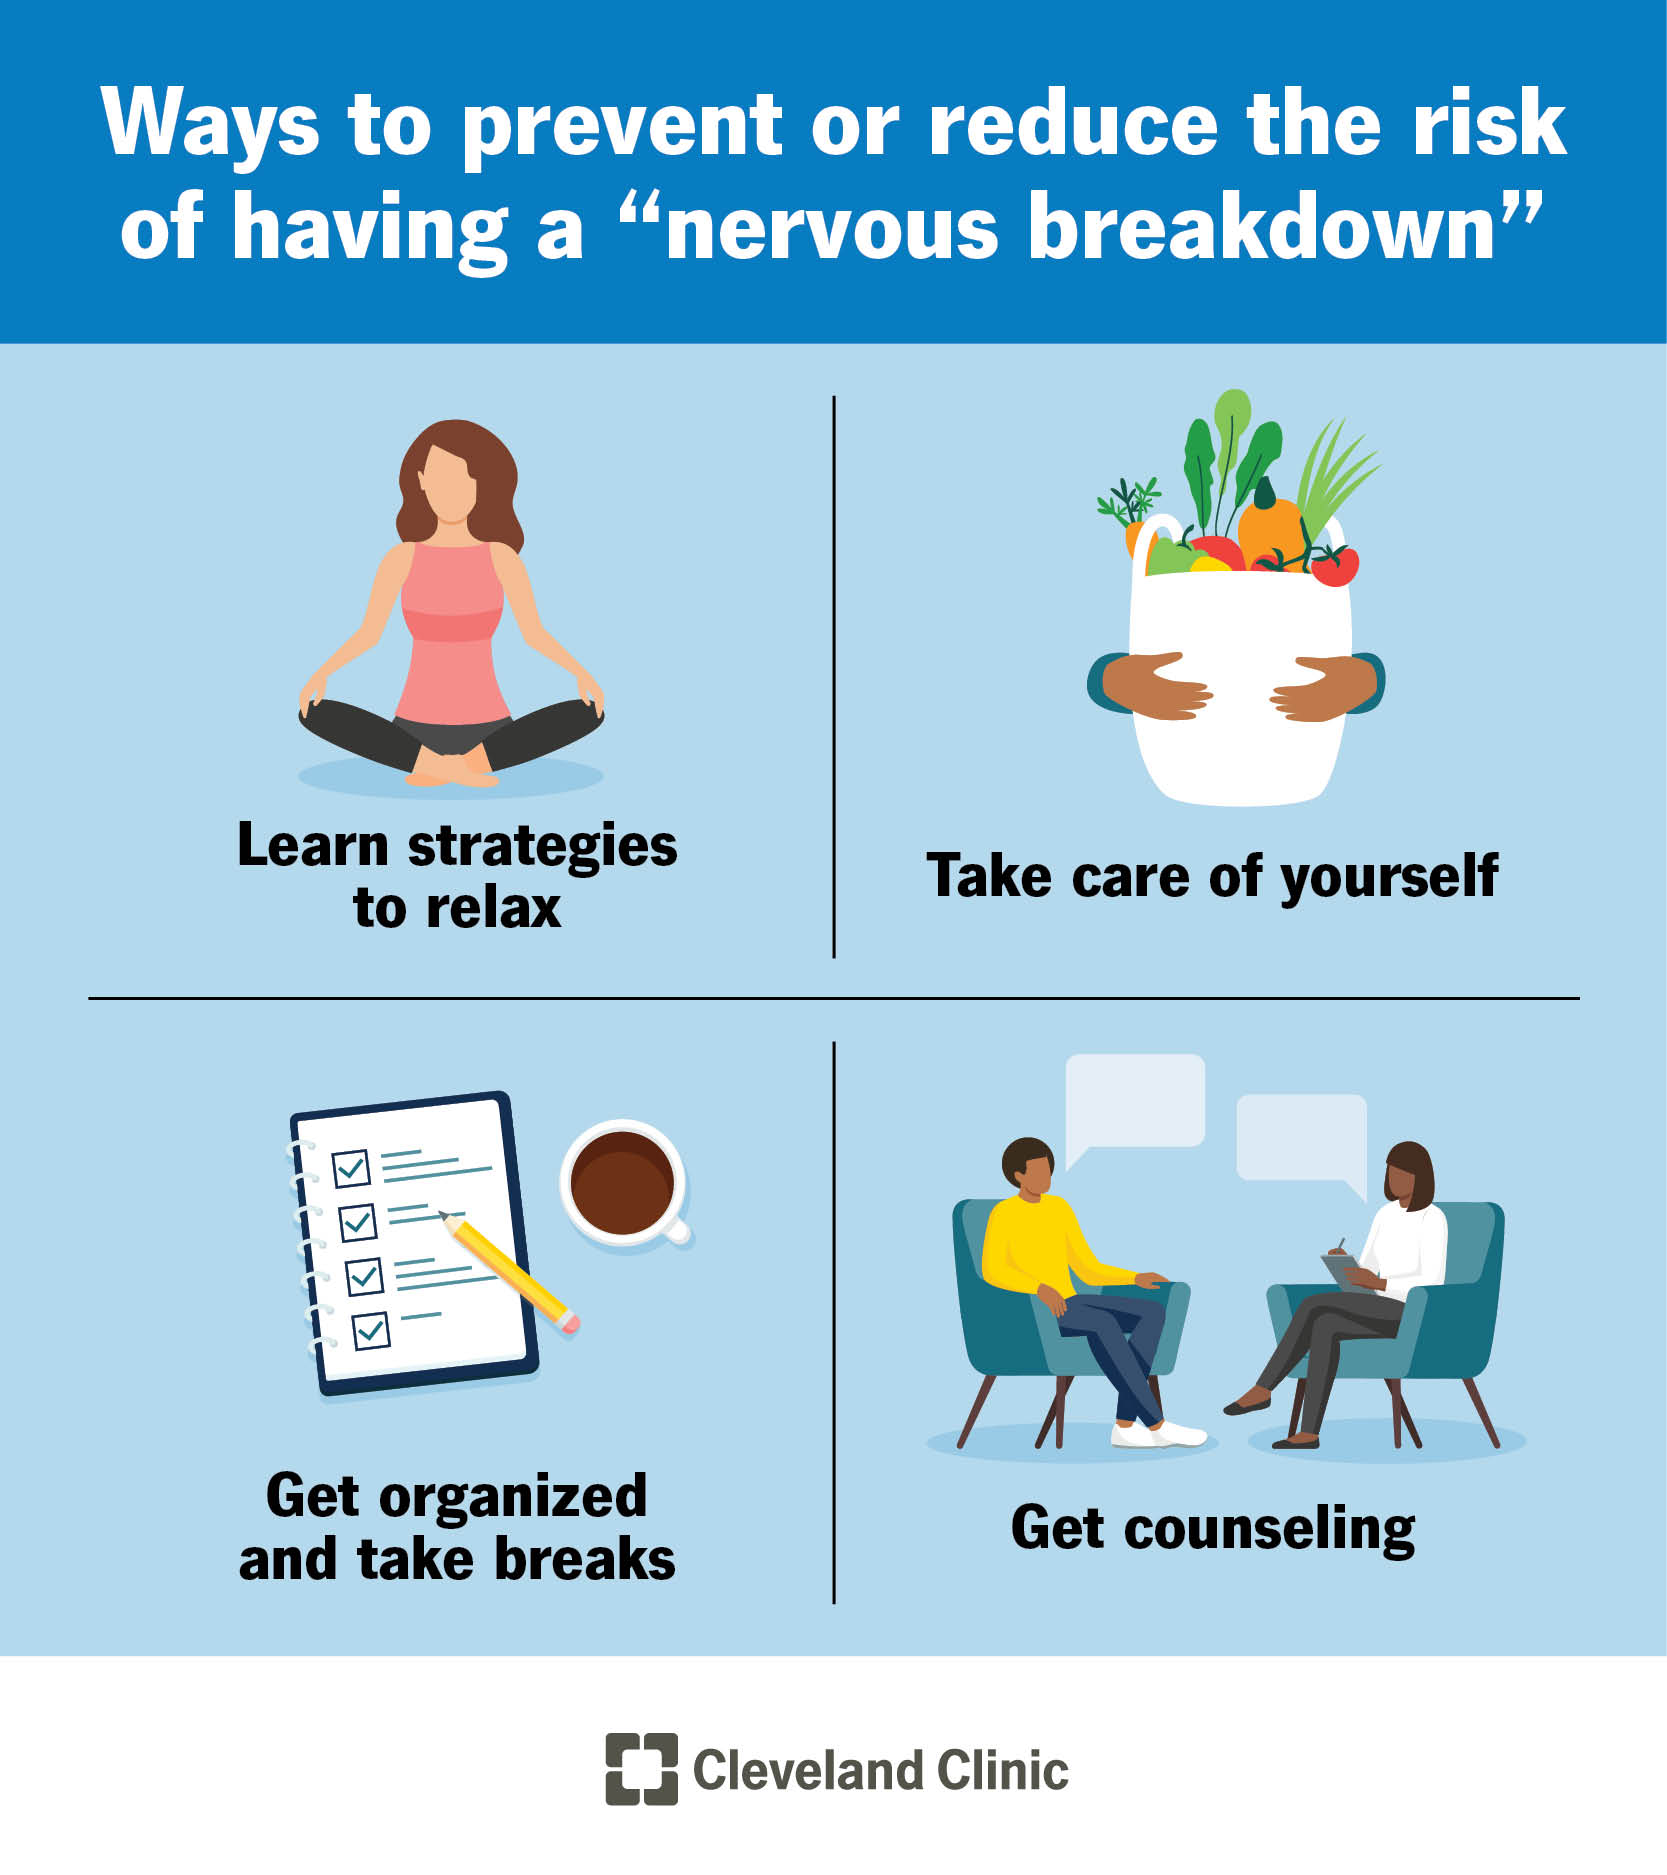 You can reduce your risk of having a “nervous breakdown” by learning relaxation strategies, taking care of yourself, getting organized and taking breaks, and talking with a mental health provider.